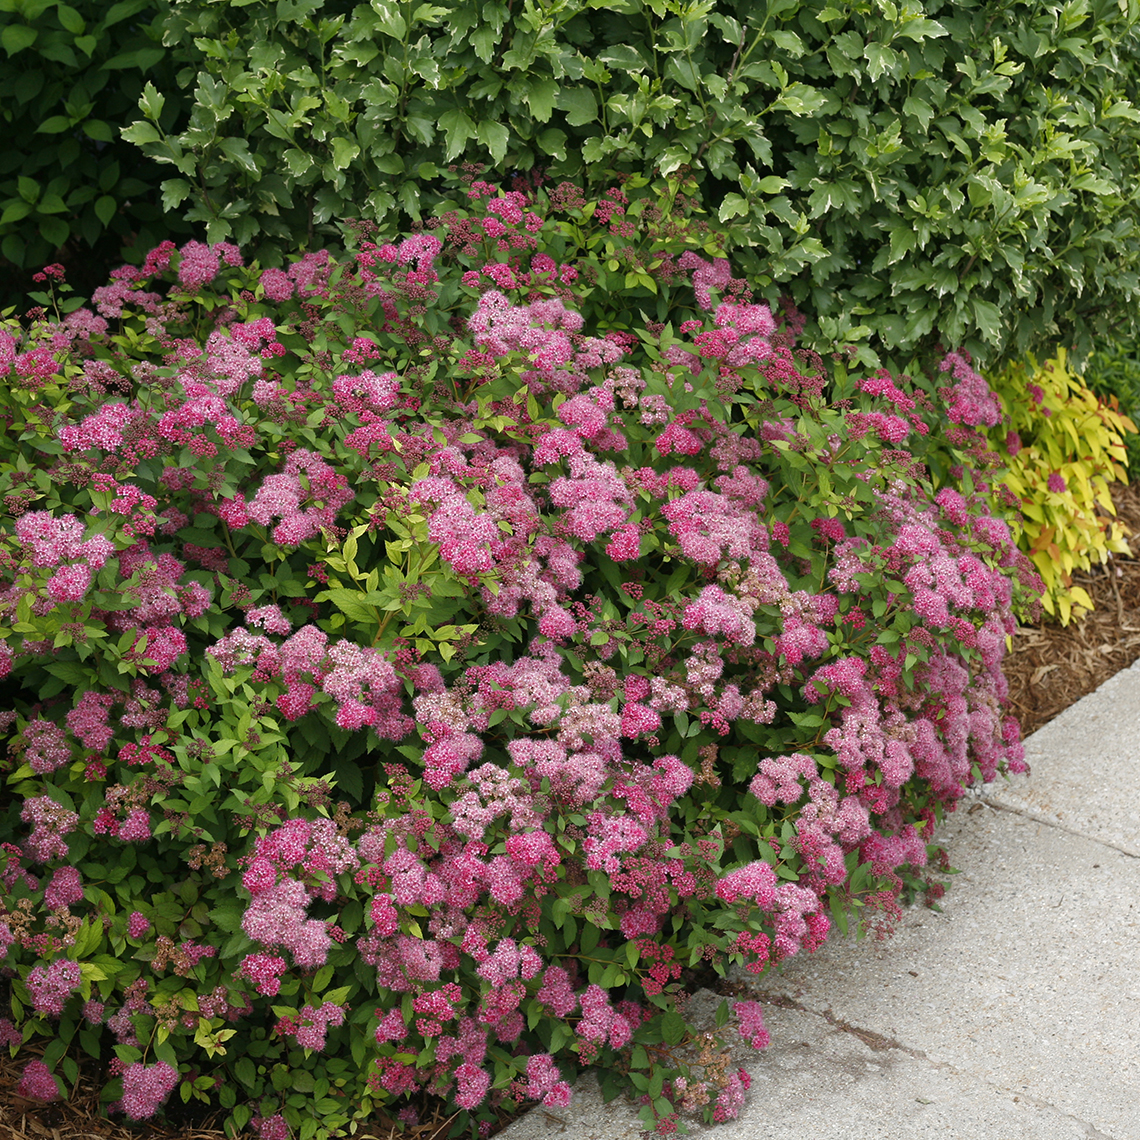 Mounded Double Play Pink Spiraea in garden bed along sidewalk